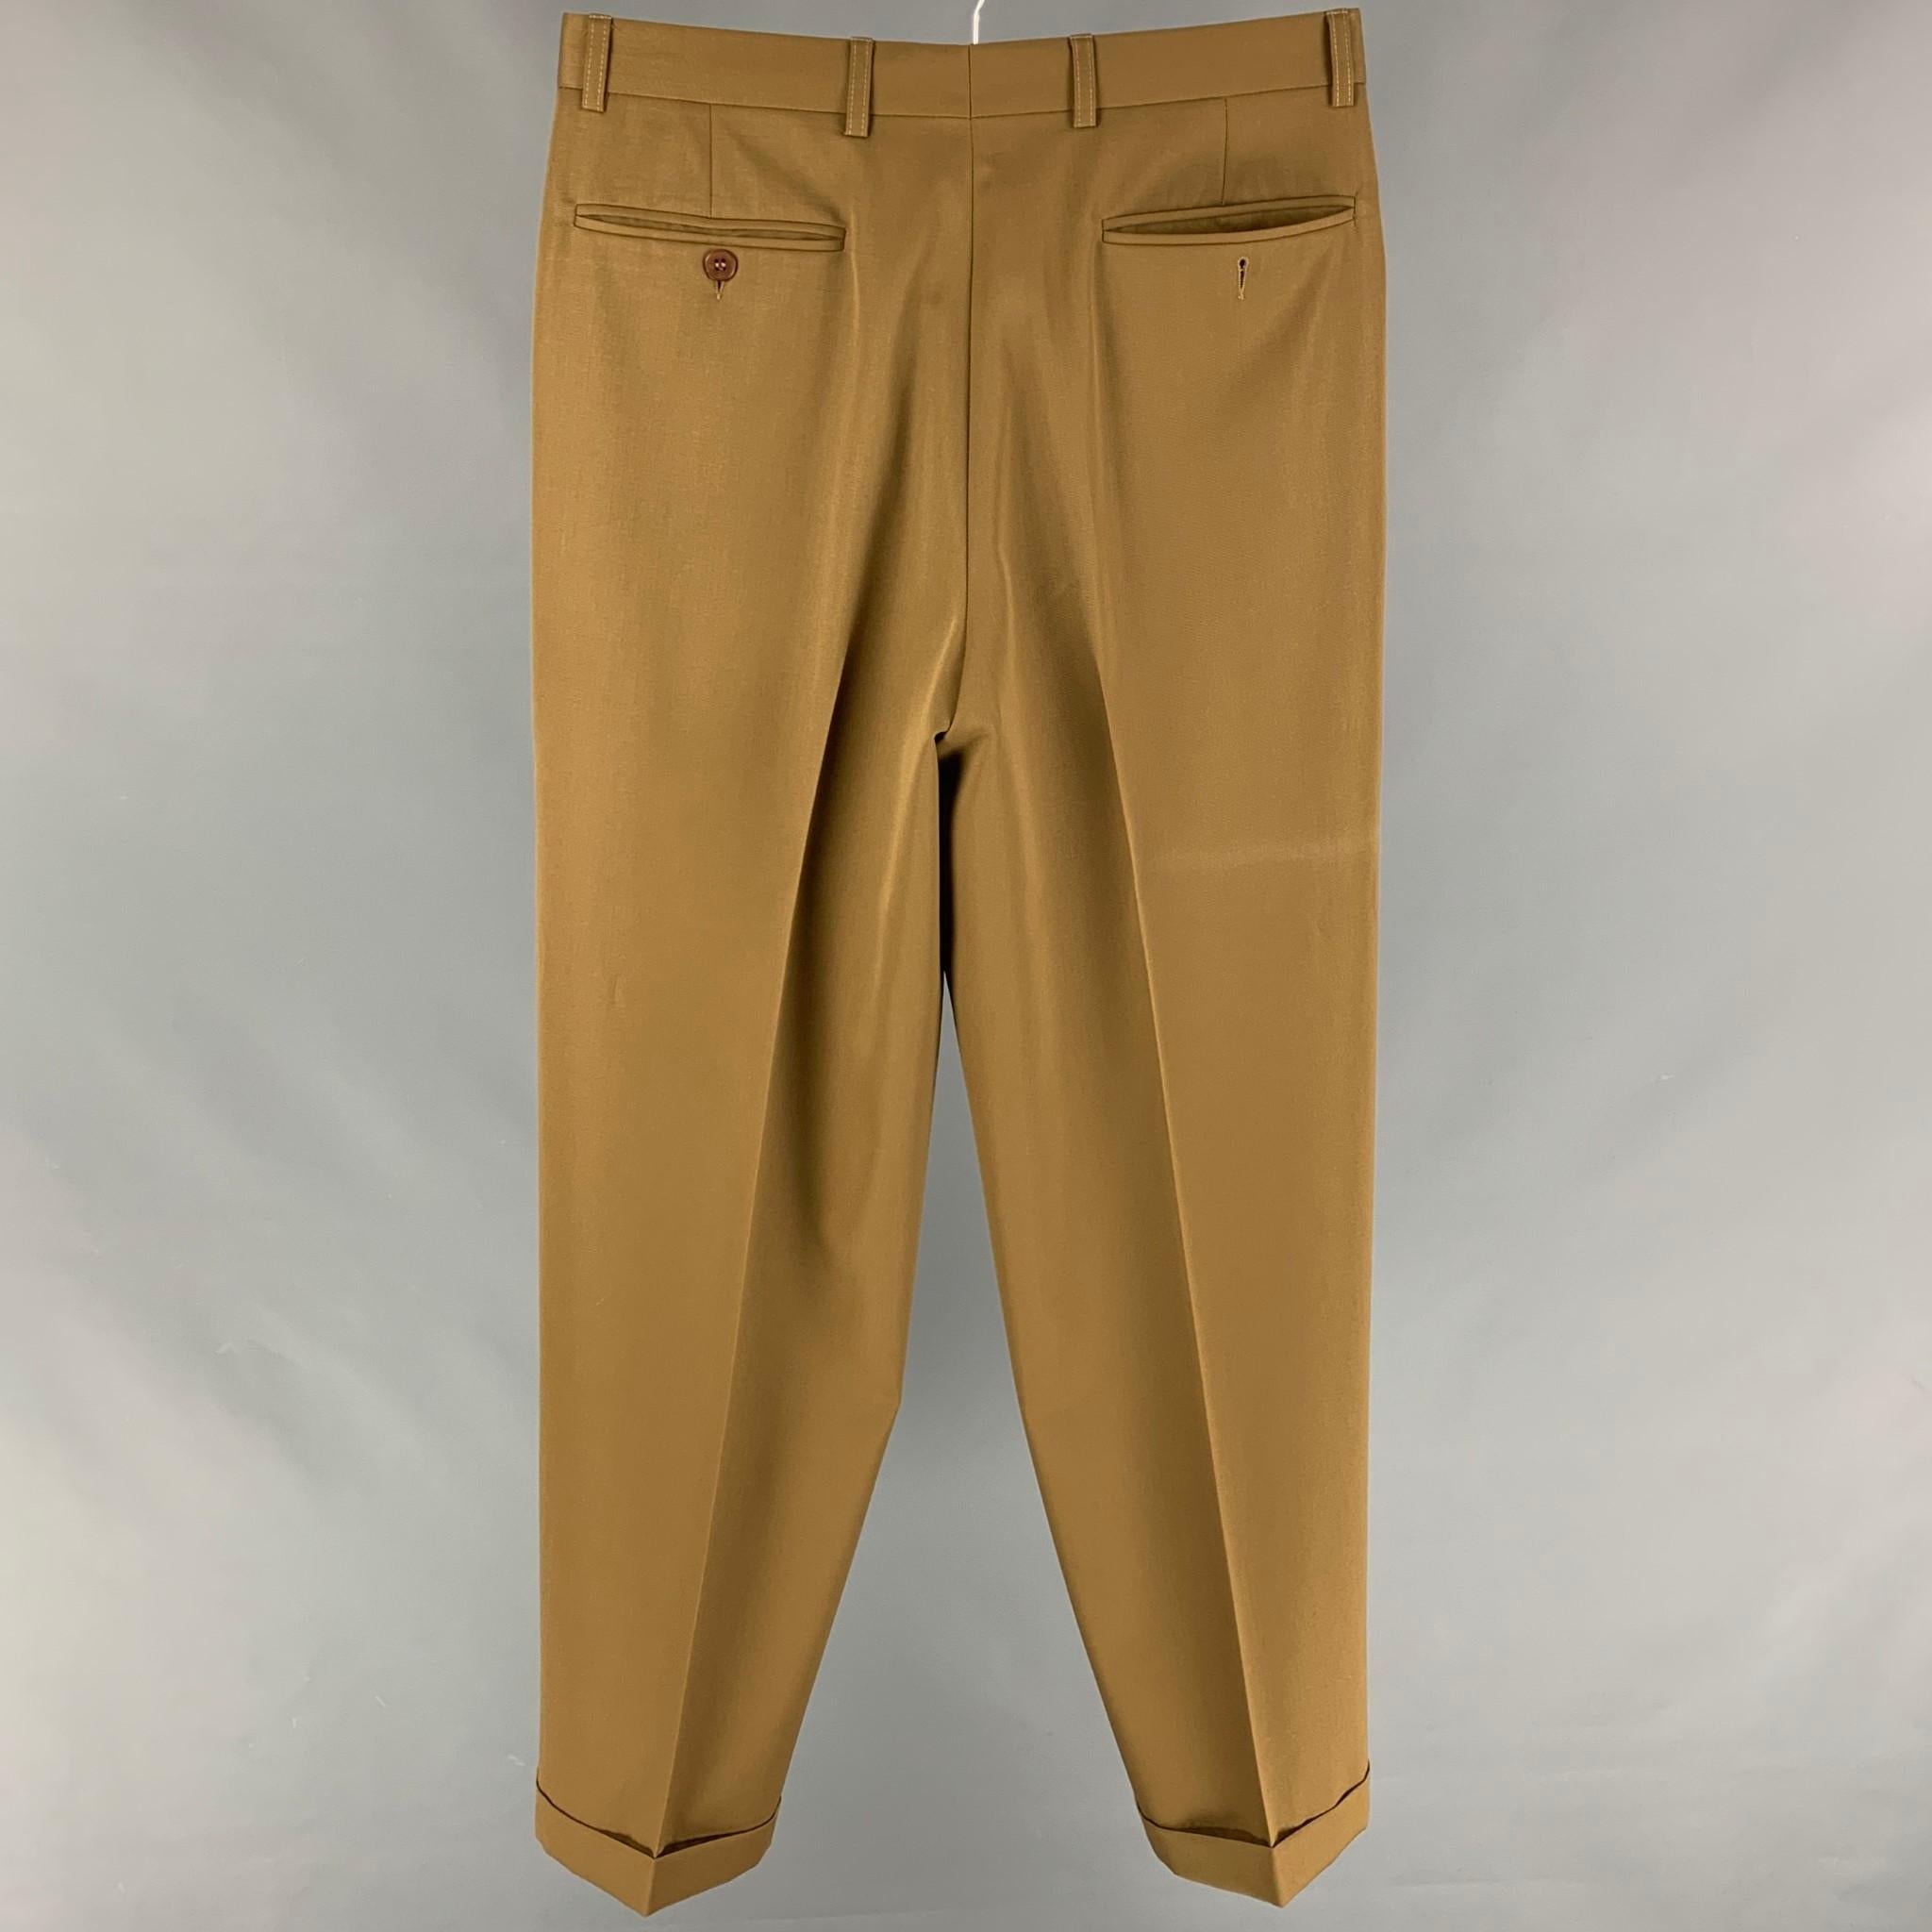 WILKES BASHFORD dress pants comes in a khaki wool featuring a front pleated style, relaxed fit, cuffed leg, and a zip fly closure. 

Very Good Pre-Owned Condition.
Marked: Size tag removed.

Measurements:

Waist: 31 in.
Rise: 12 in.
Inseam: 31 in. 